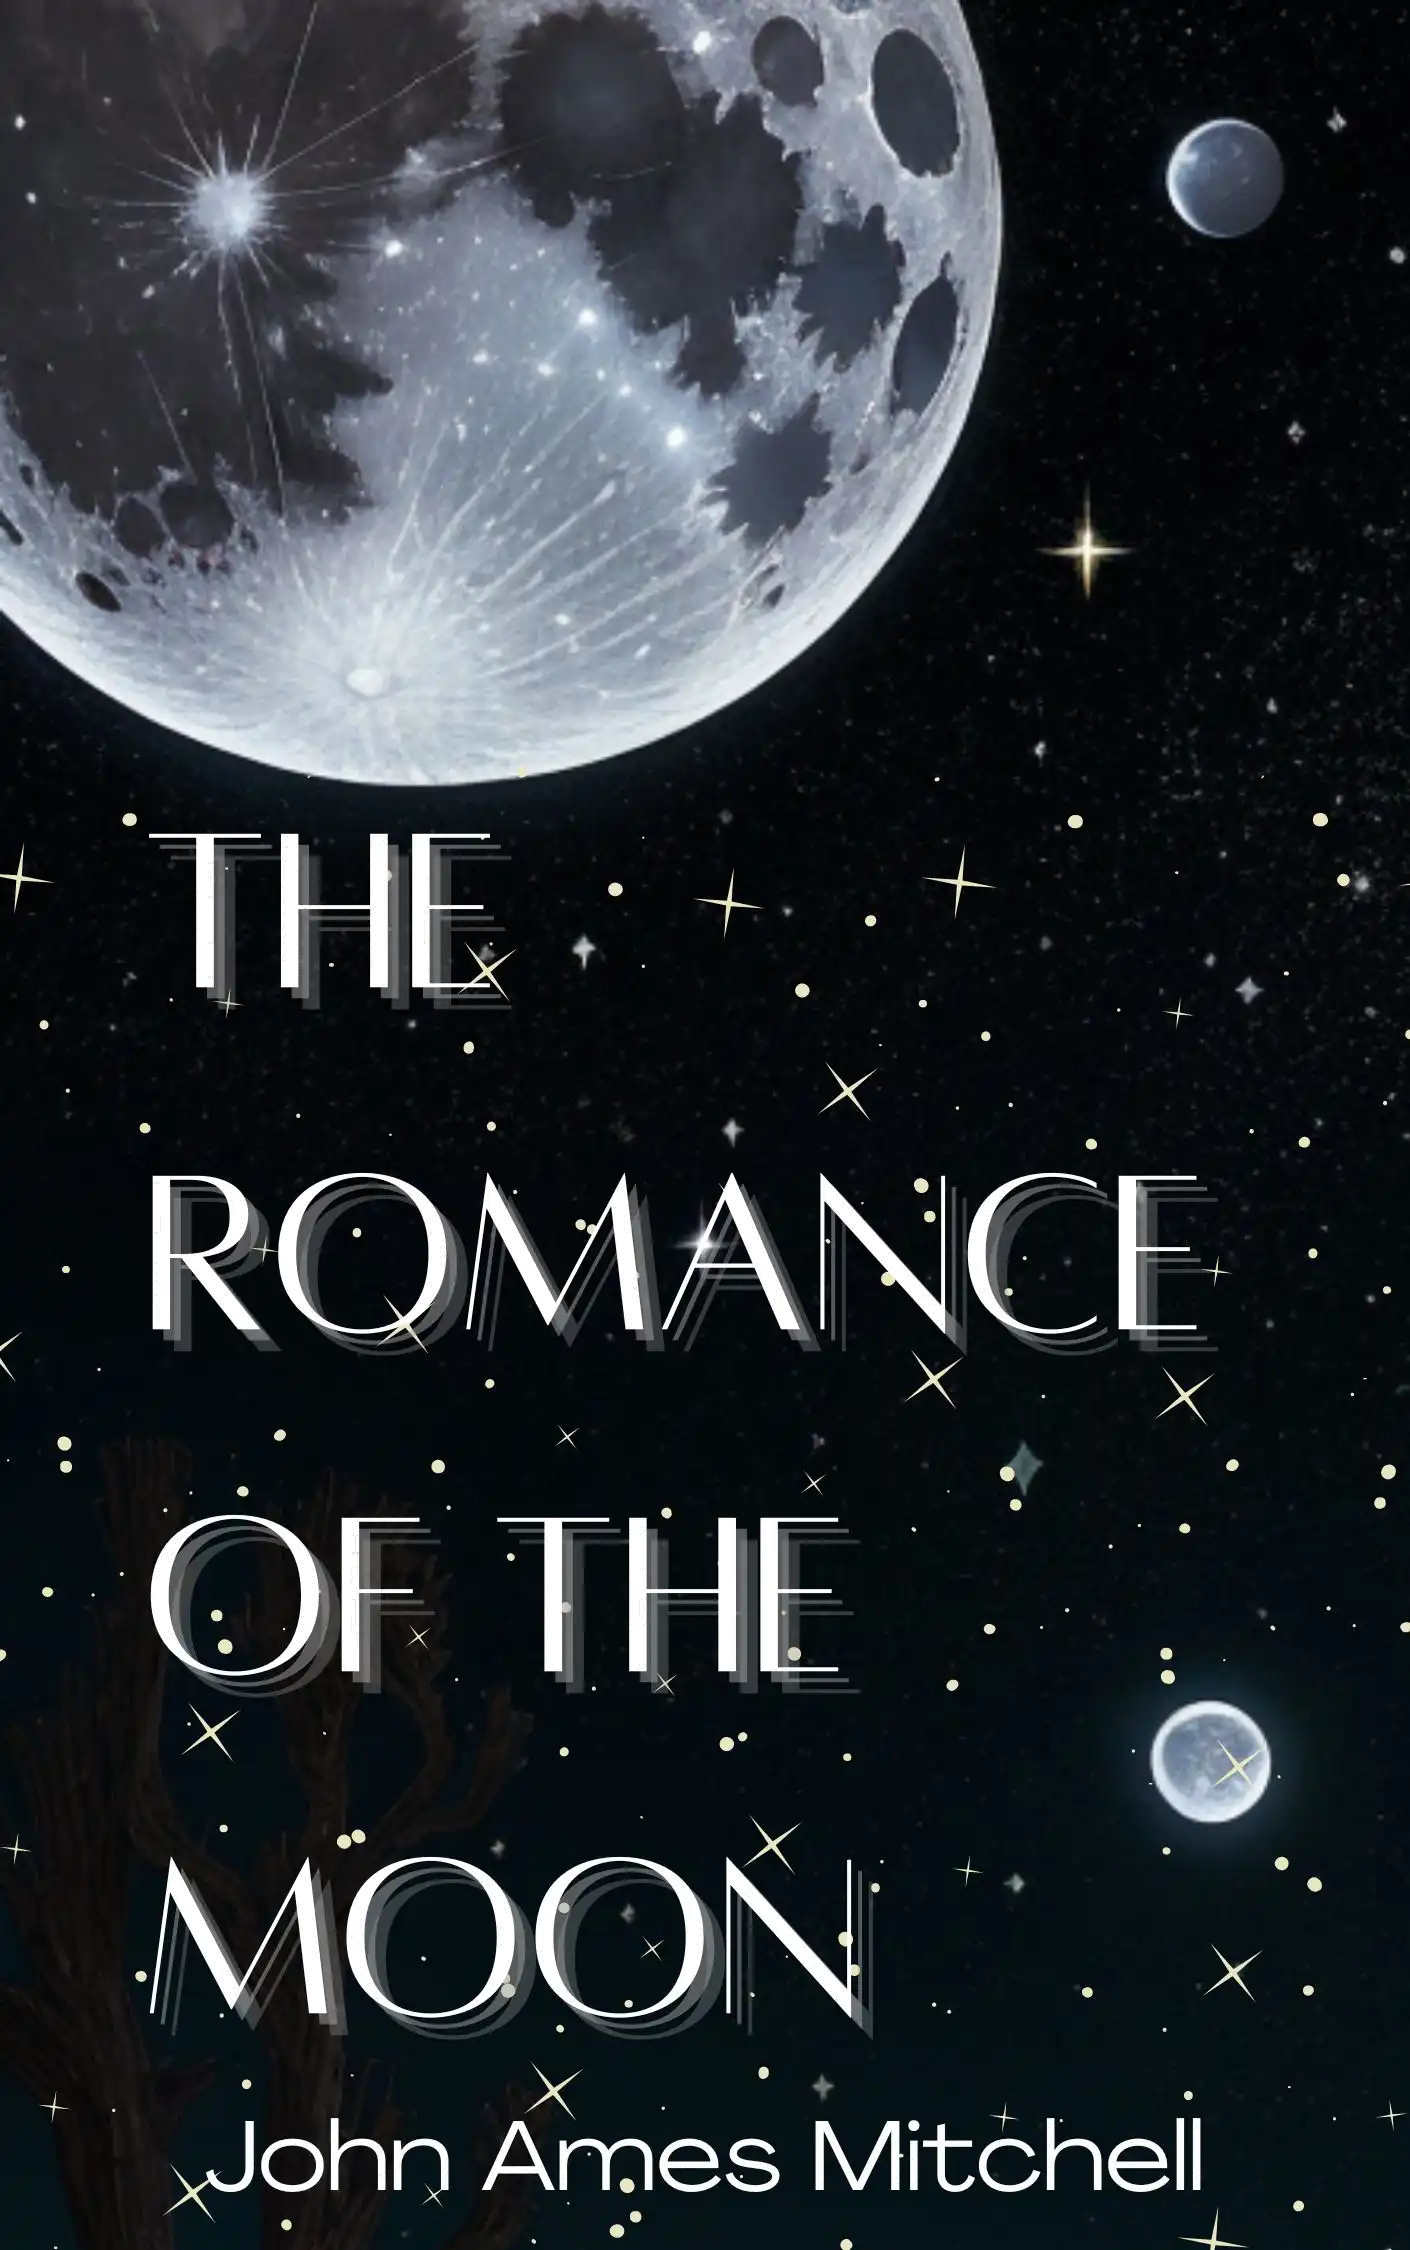 The Romance of the Moon Audiobook by John Ames Mitchell